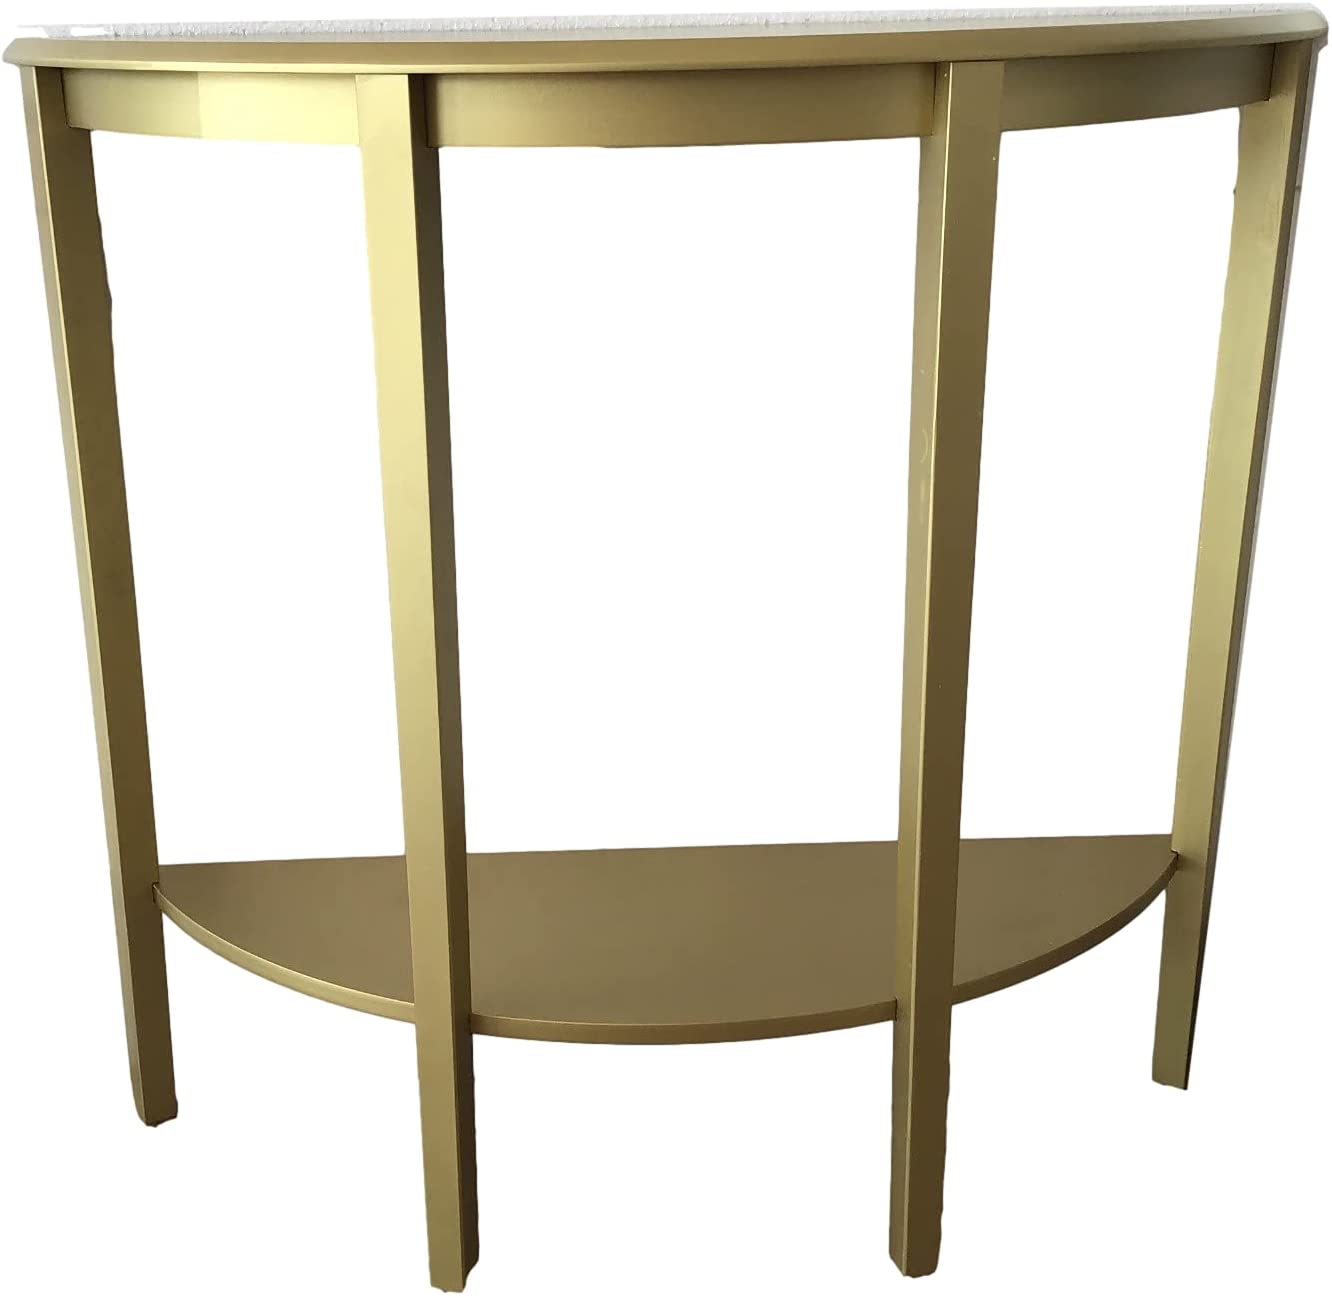 Wooden Half Moon Console Table Hallway 1 Shelf Storage Furniture Unit Table In Gold